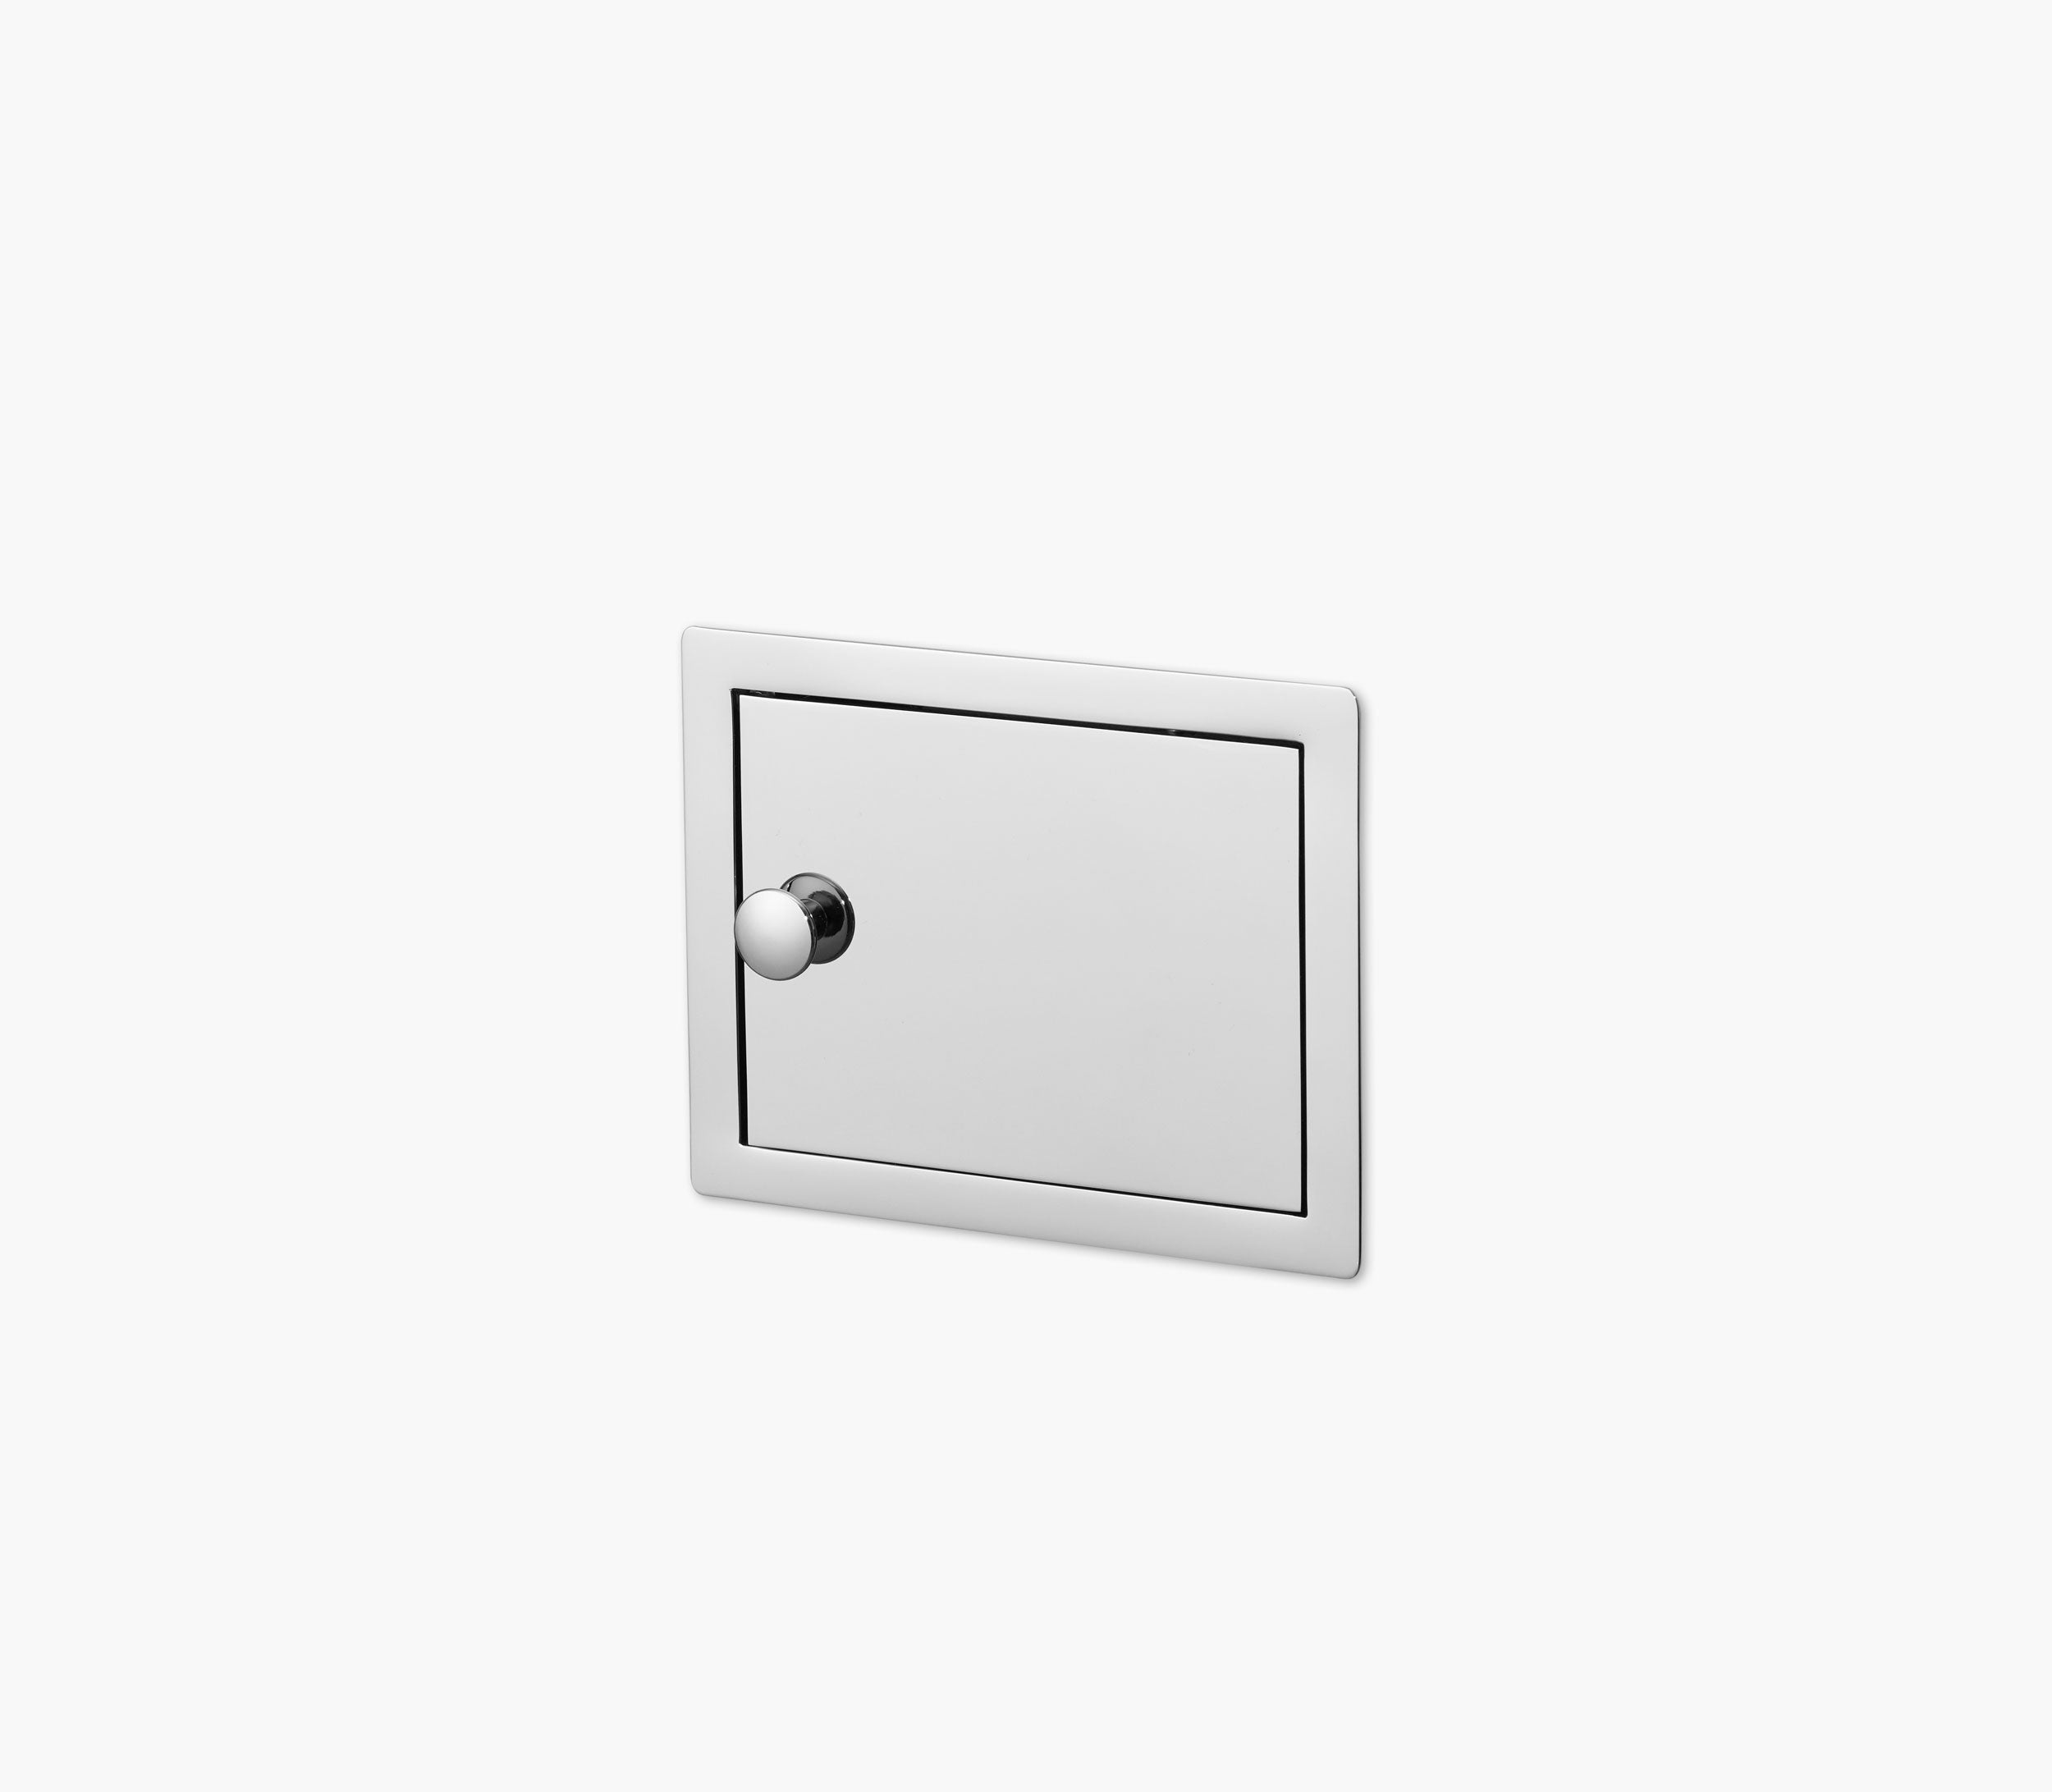 Wall Recessed Toilet Paper Holder II Open Left Product Image 1